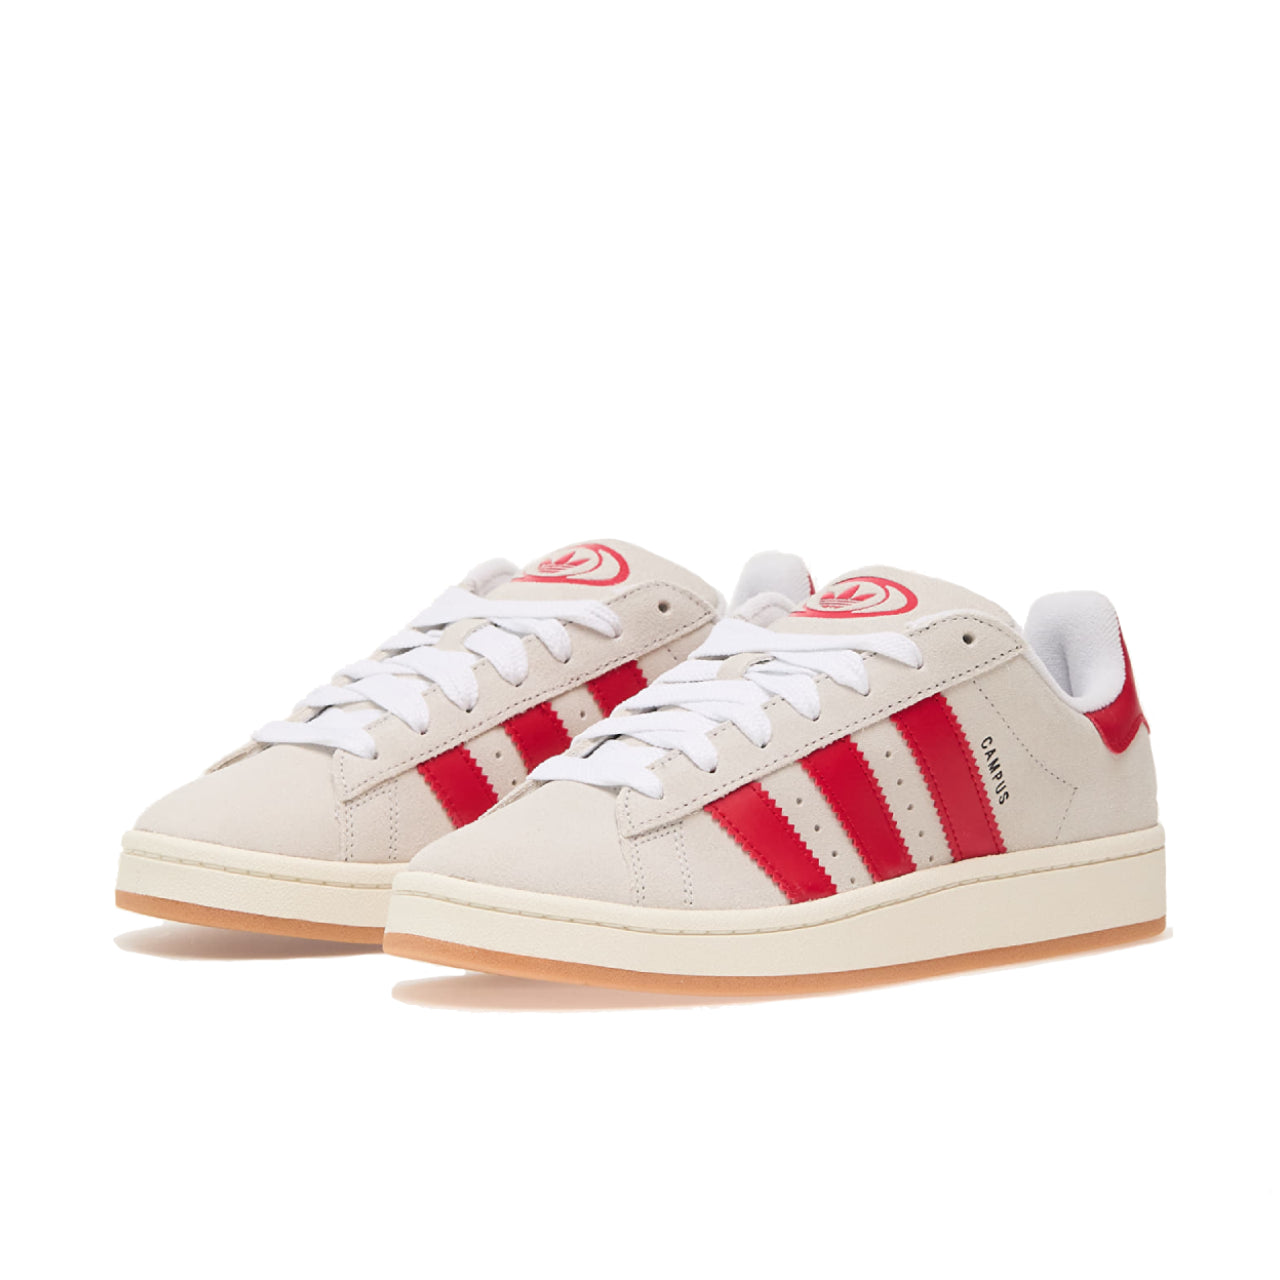 adidas Campus 00s Crystal White Better Scarlet - GY0037 - Medial